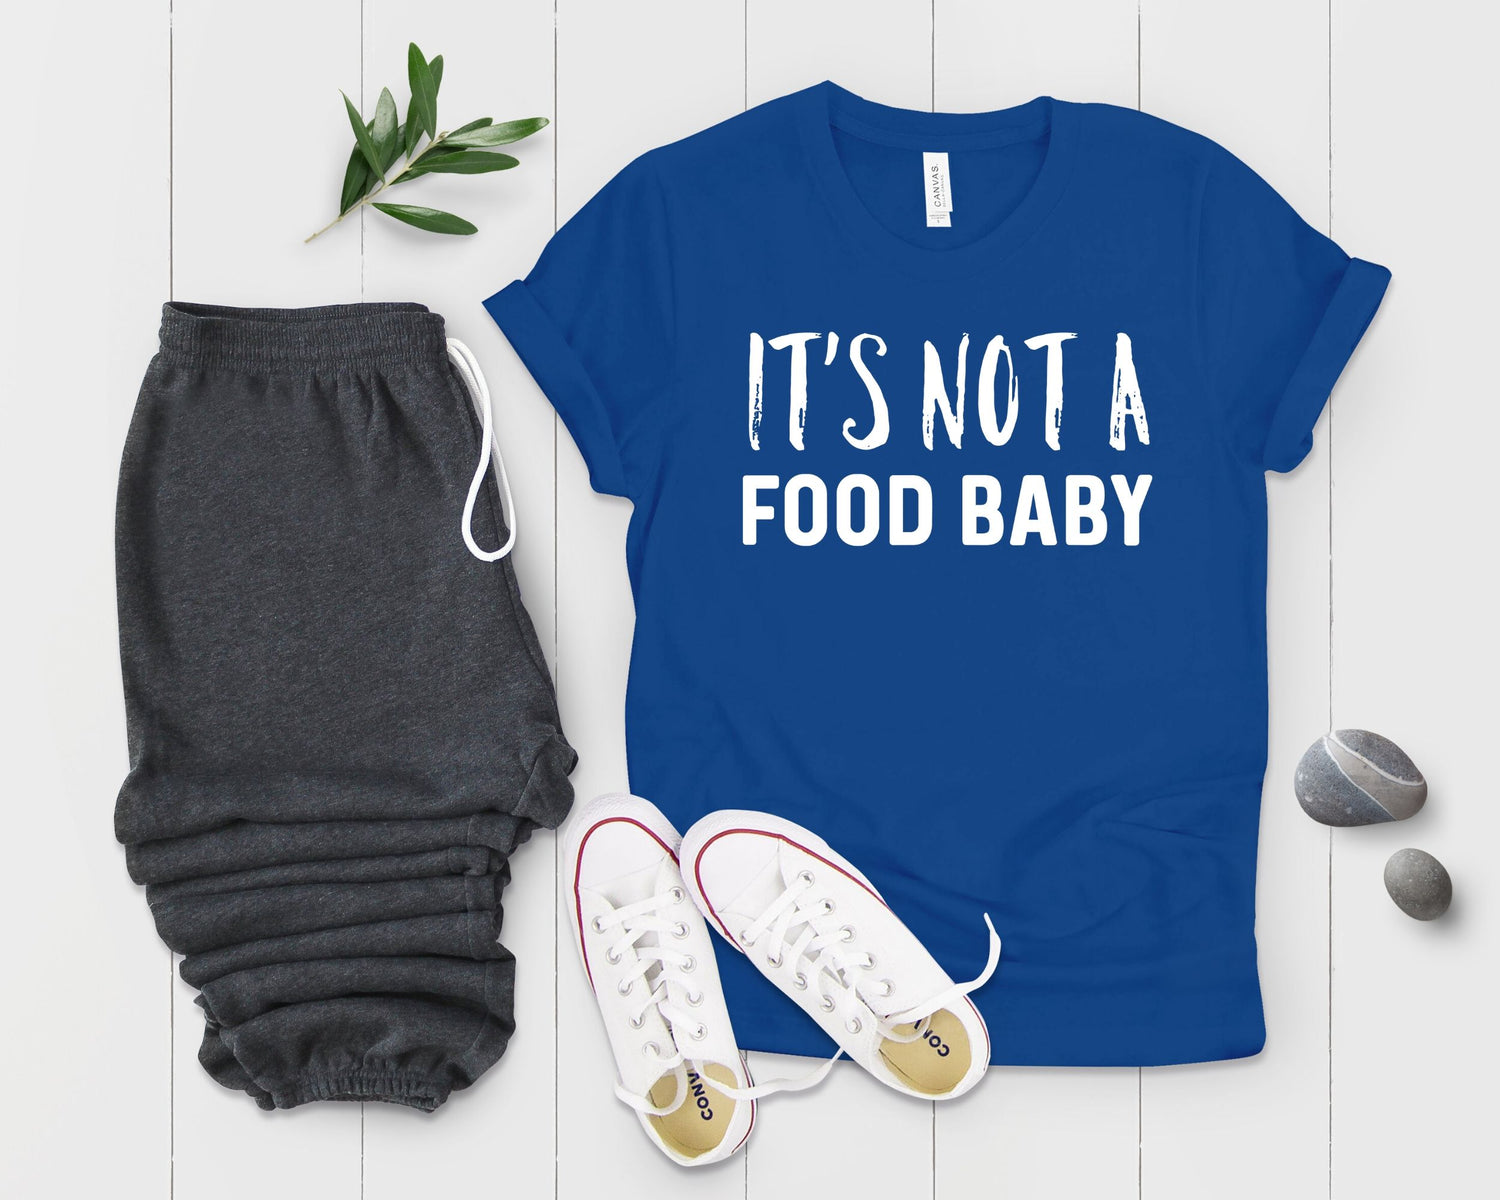 It's Not A Food Baby Pregnancy T Shirt Maternity Clothes - Teegarb